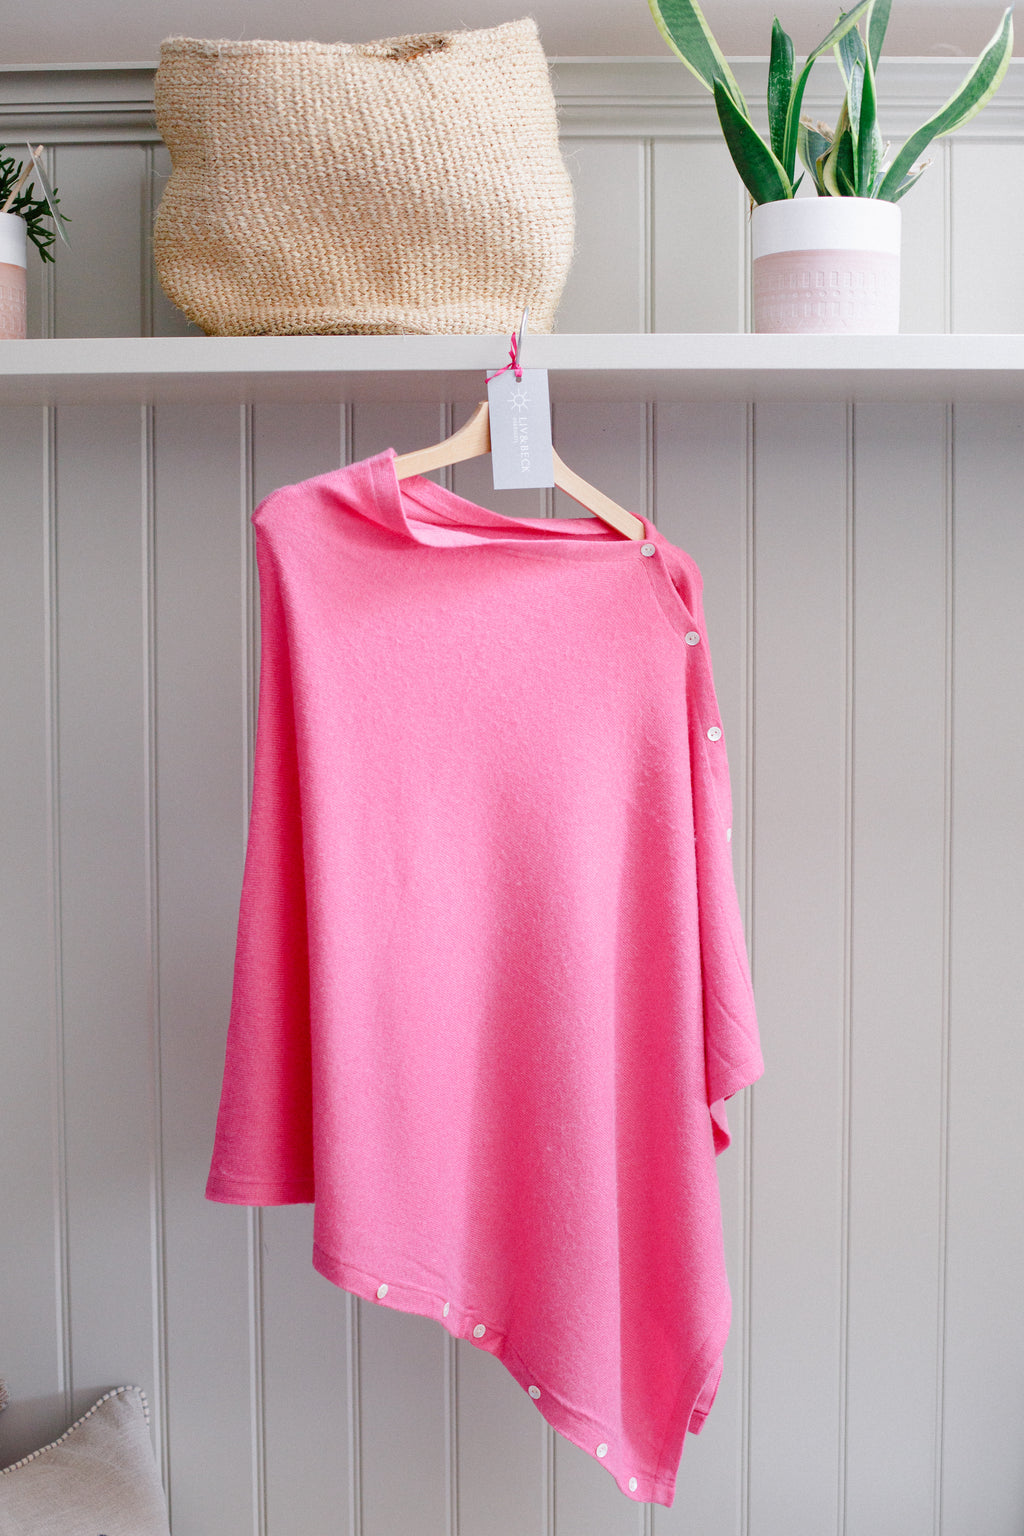 Cashmere Poncho Taffy Pink - SPECIAL OFFER